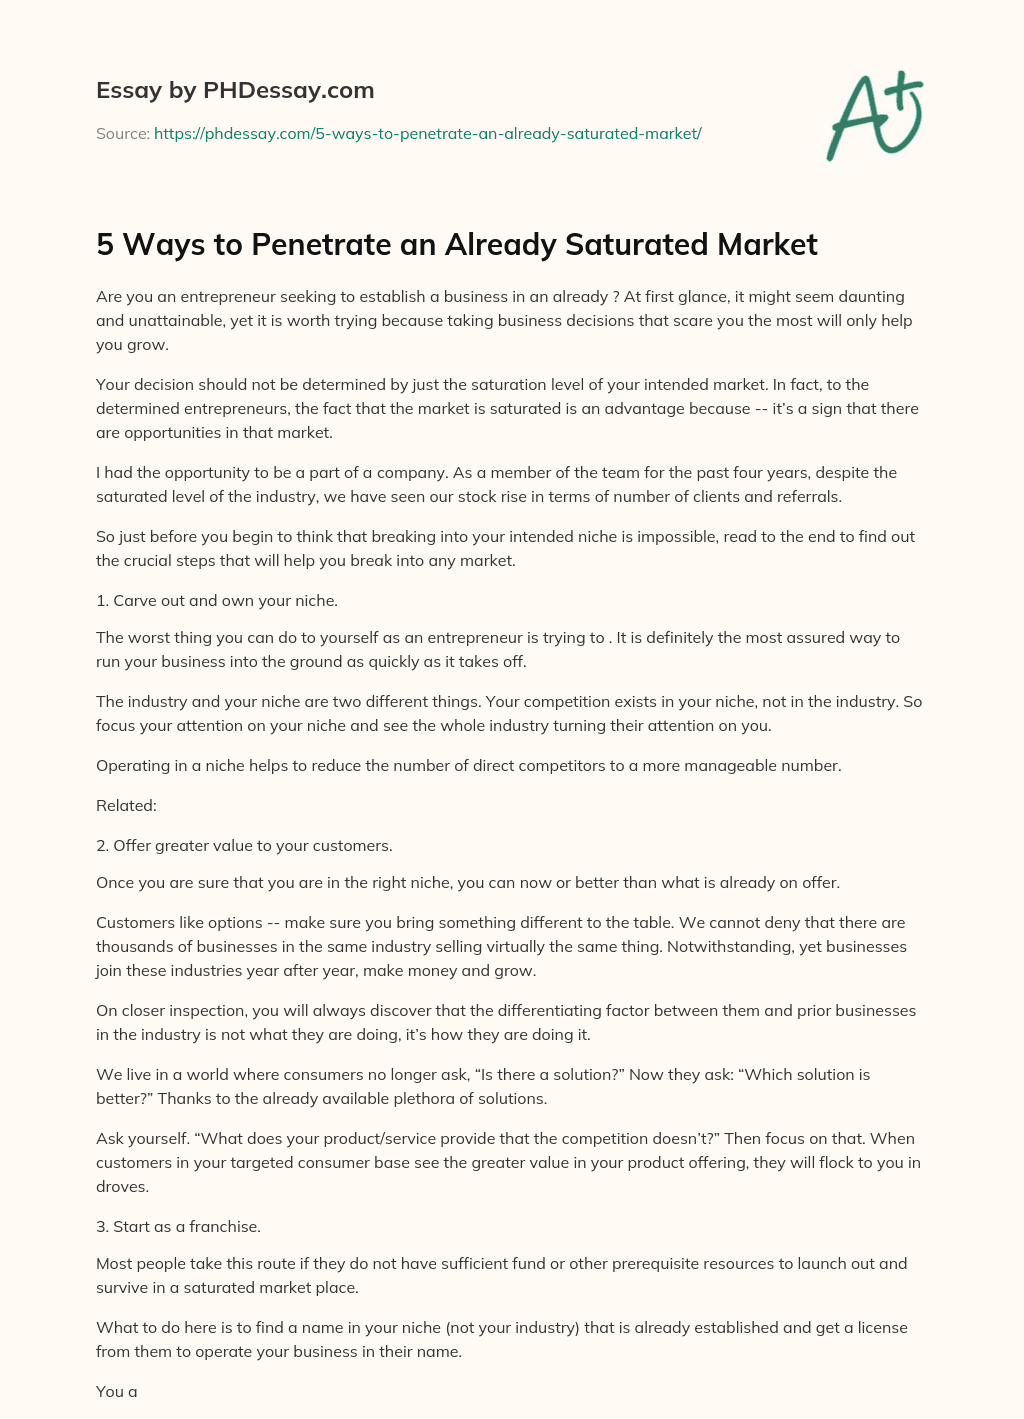 5 Ways to Penetrate an Already Saturated Market essay